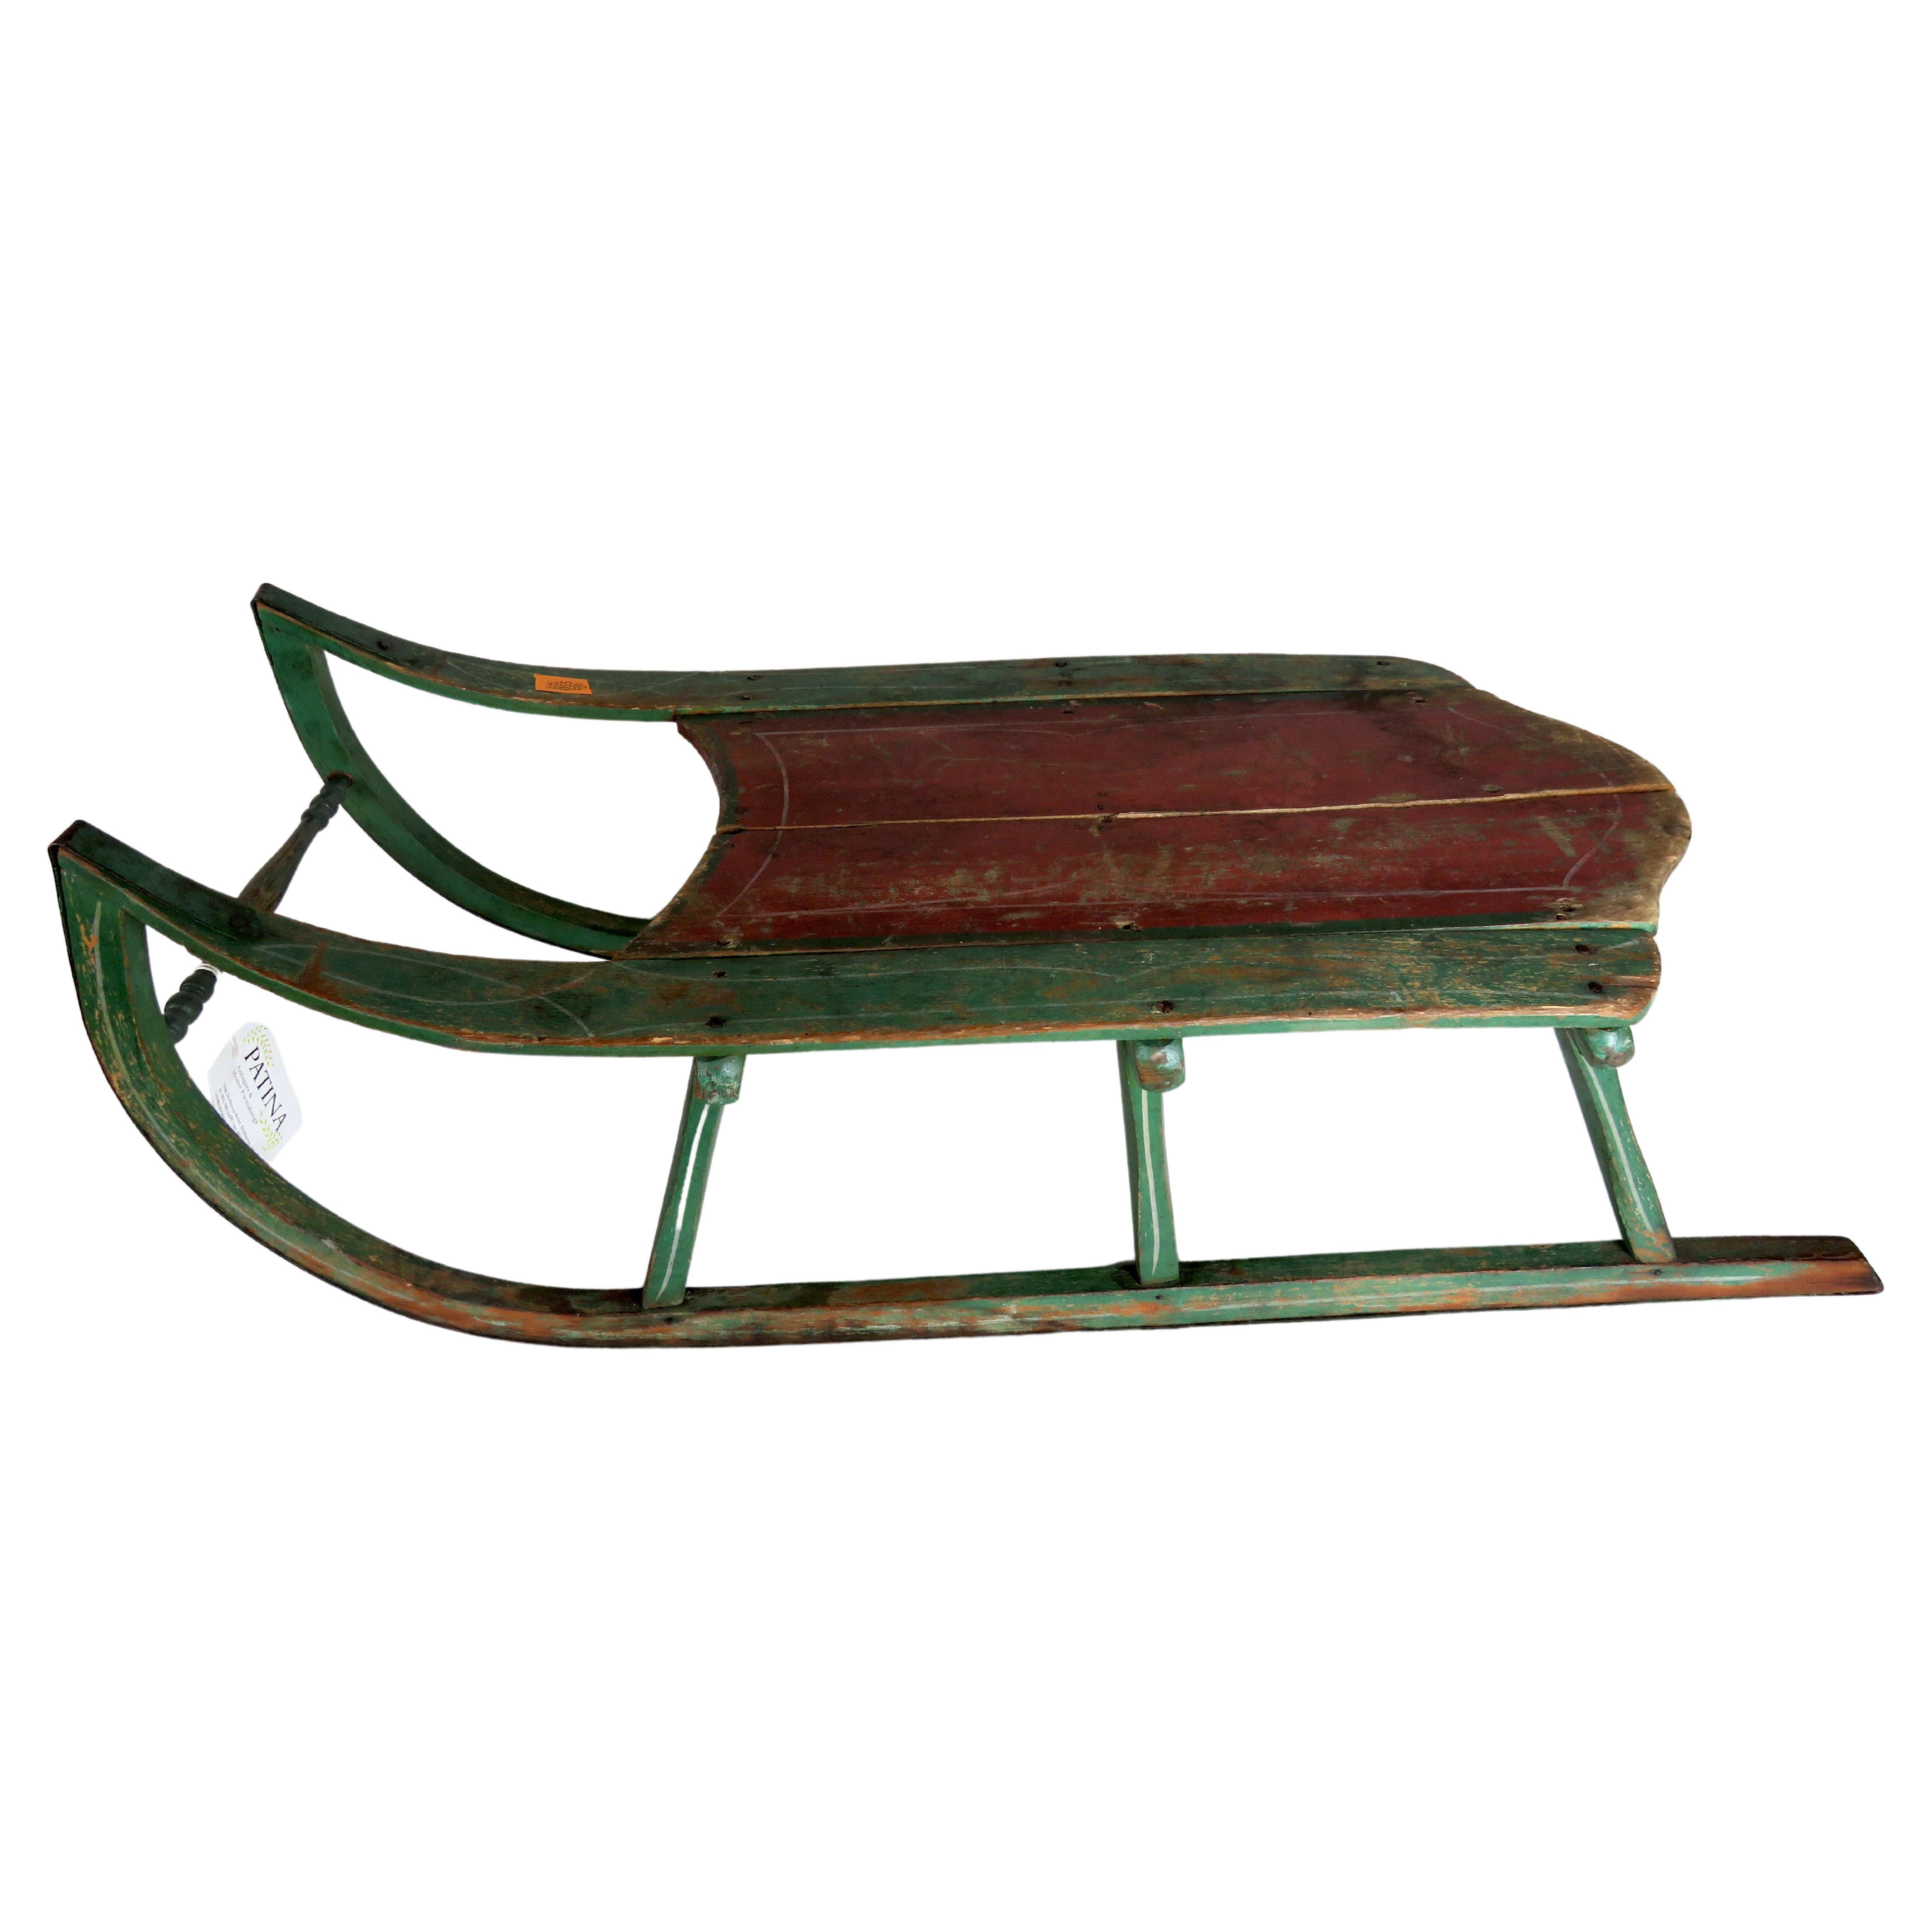 Antique Child's Sled in Green and Red Paint